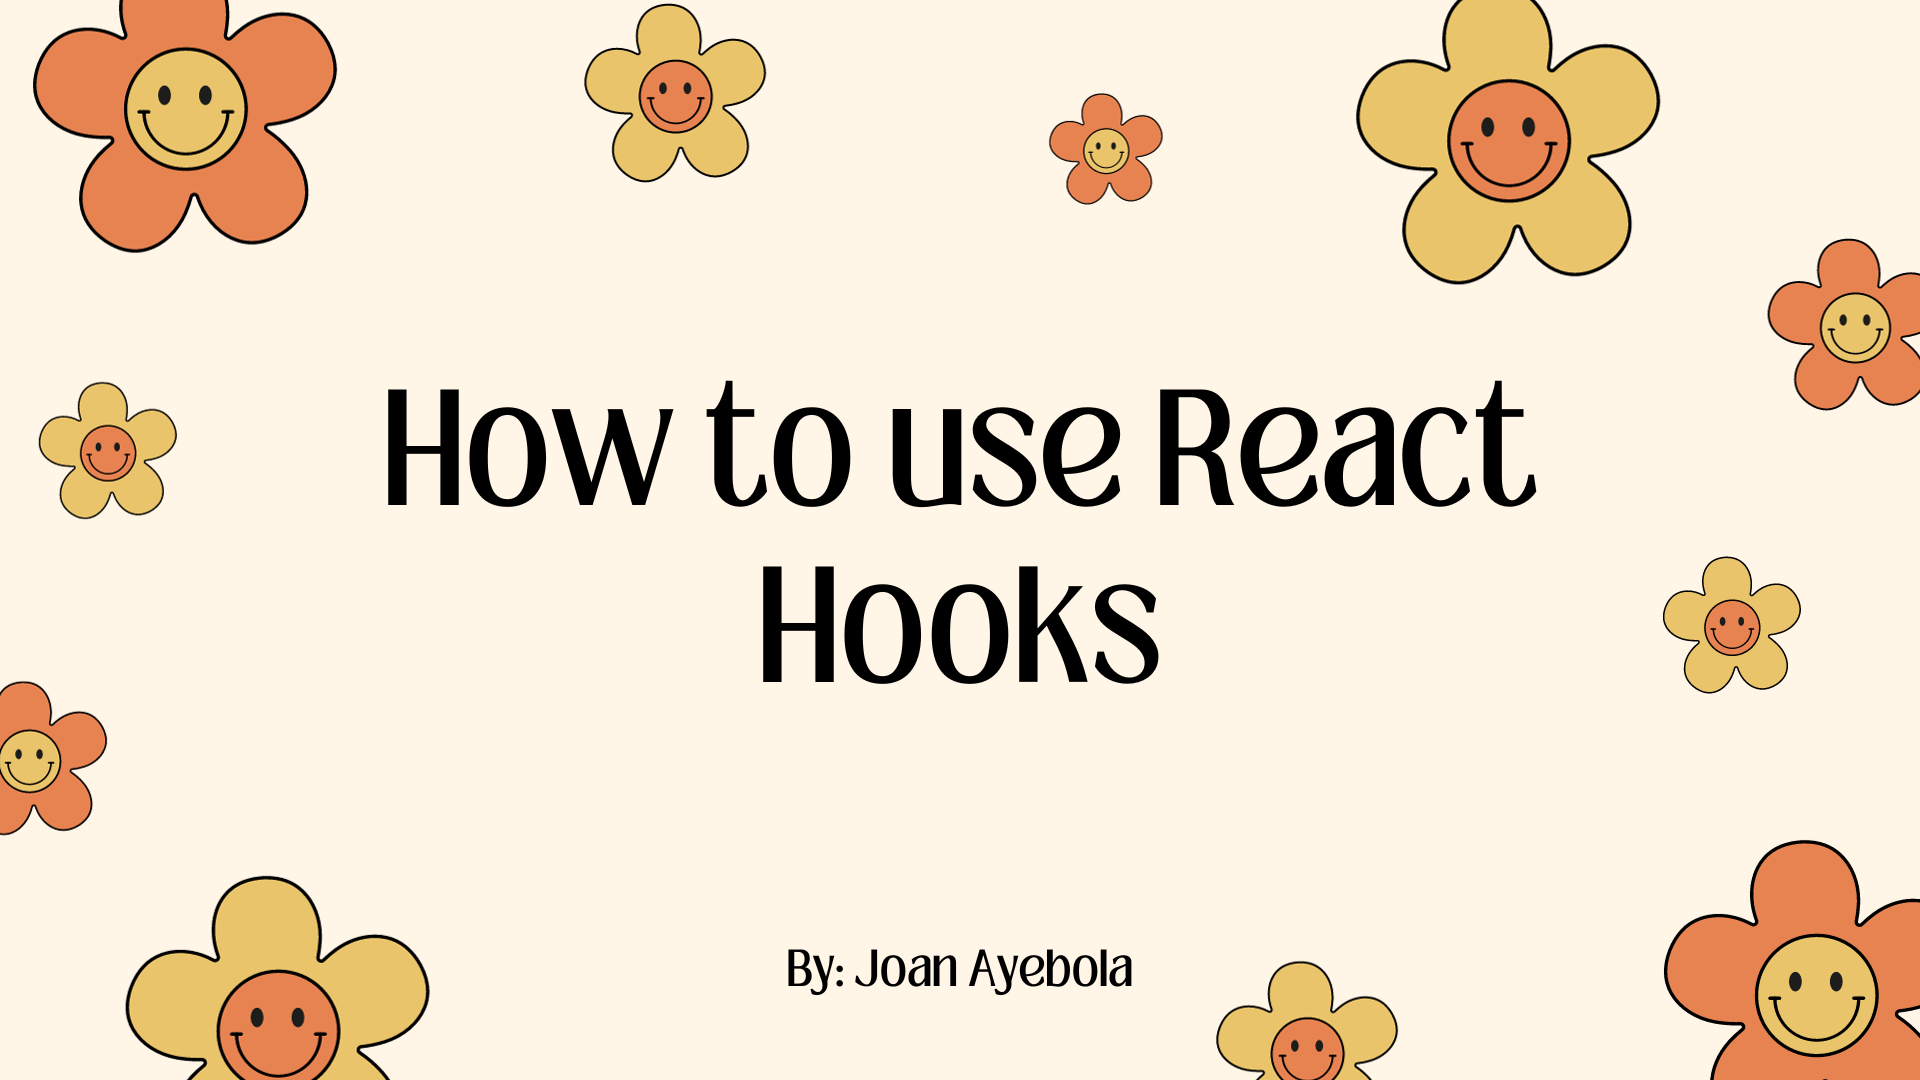 How to Use React Hooks – useEffect, useState, and useContext Code Examples